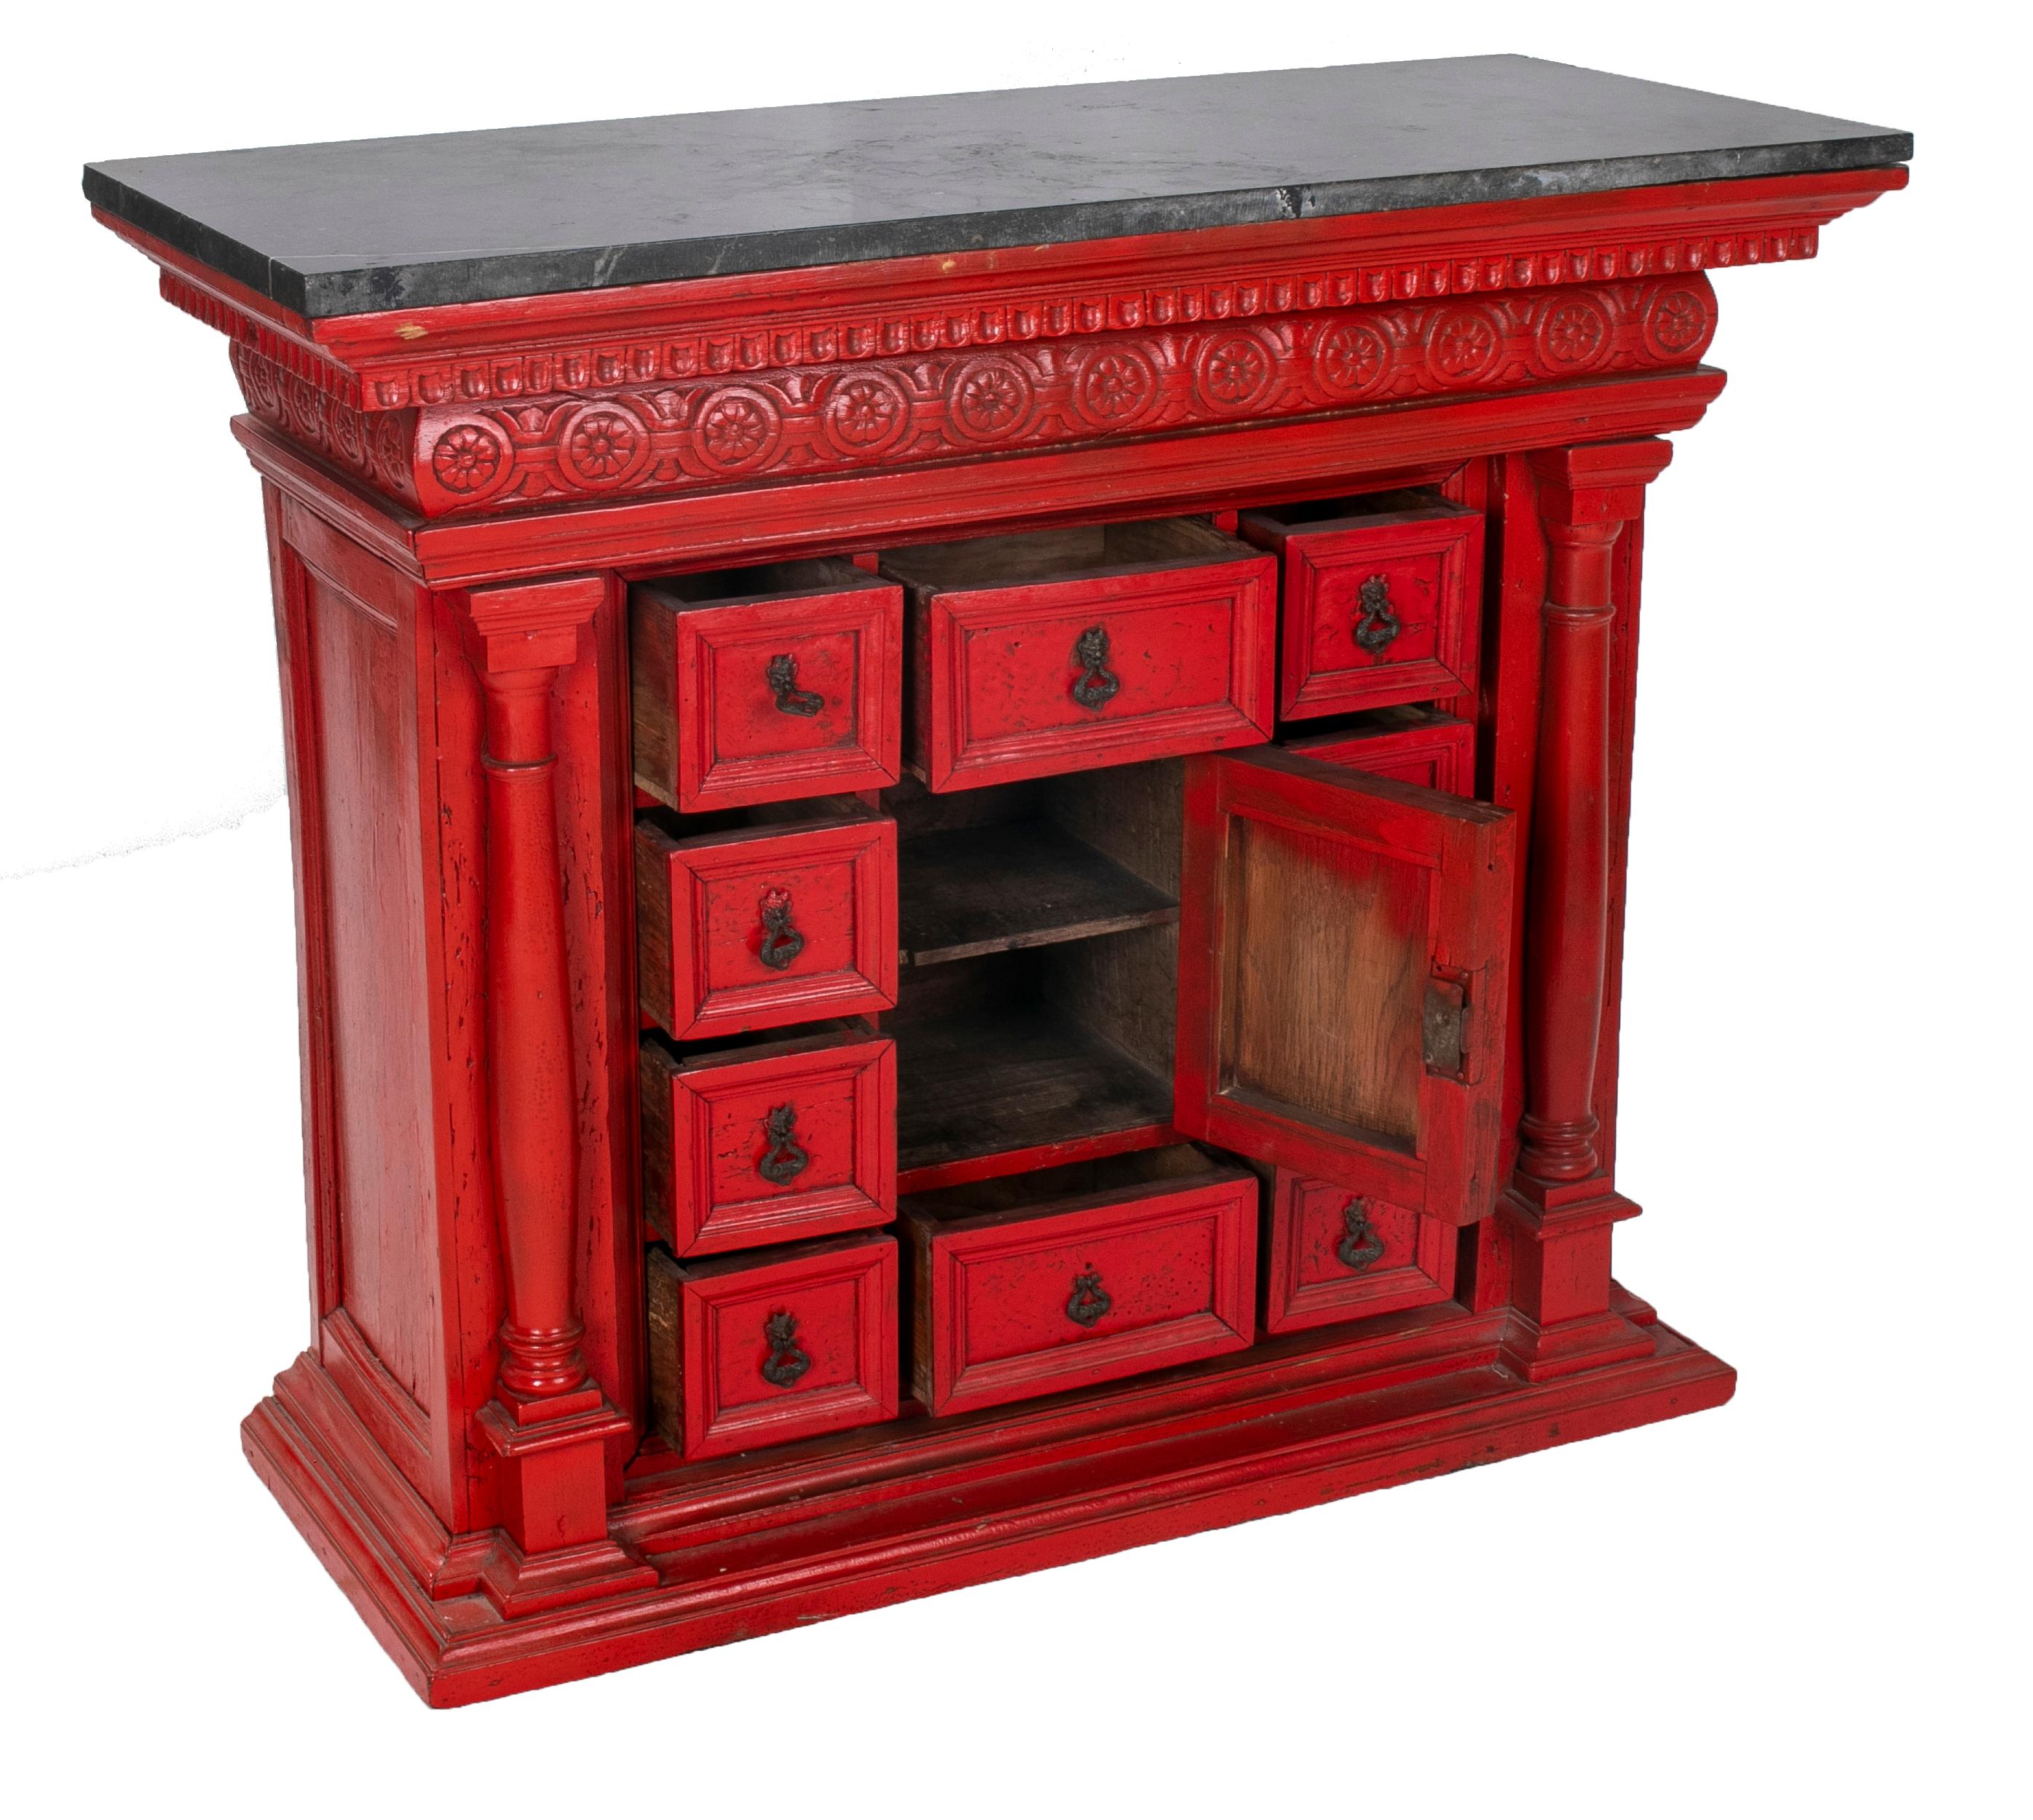 19th century French 8-drawer red painted cabinet.